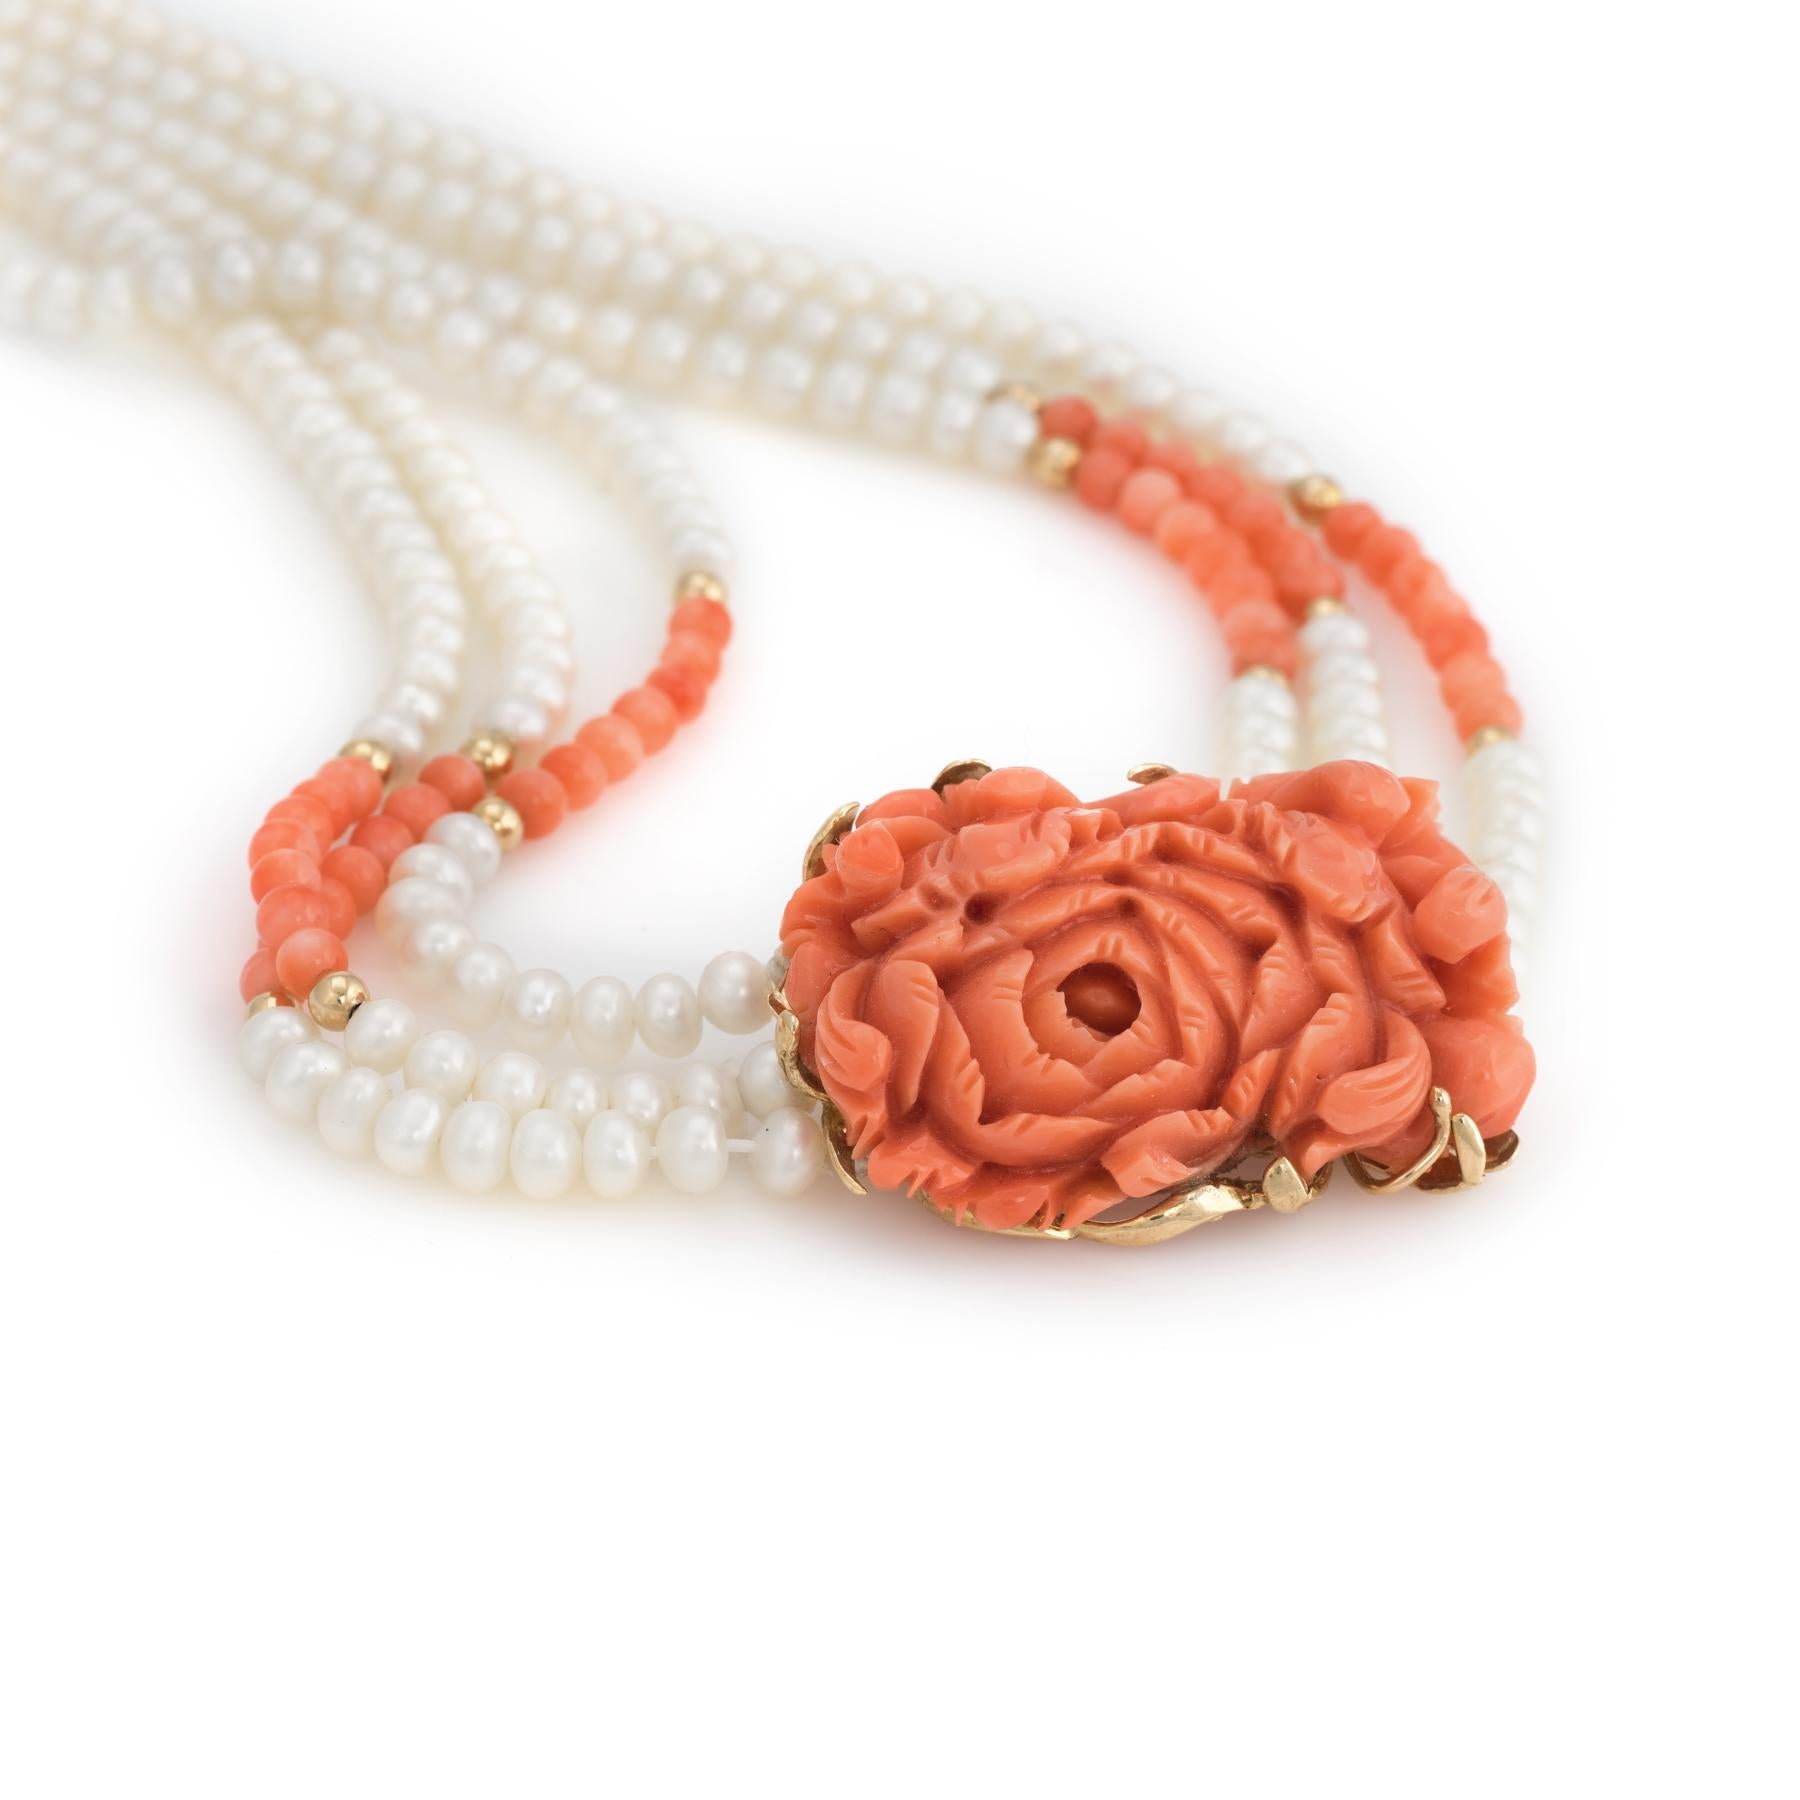 Elegant vintage coral & freshwater pearl necklace with 14 karat yellow gold details.

One piece of coral is carved in the form of a flower and measures 1 1/4 x 1 inch. Coral beads are strung onto the necklace and each measure 3.5mm. The freshwater